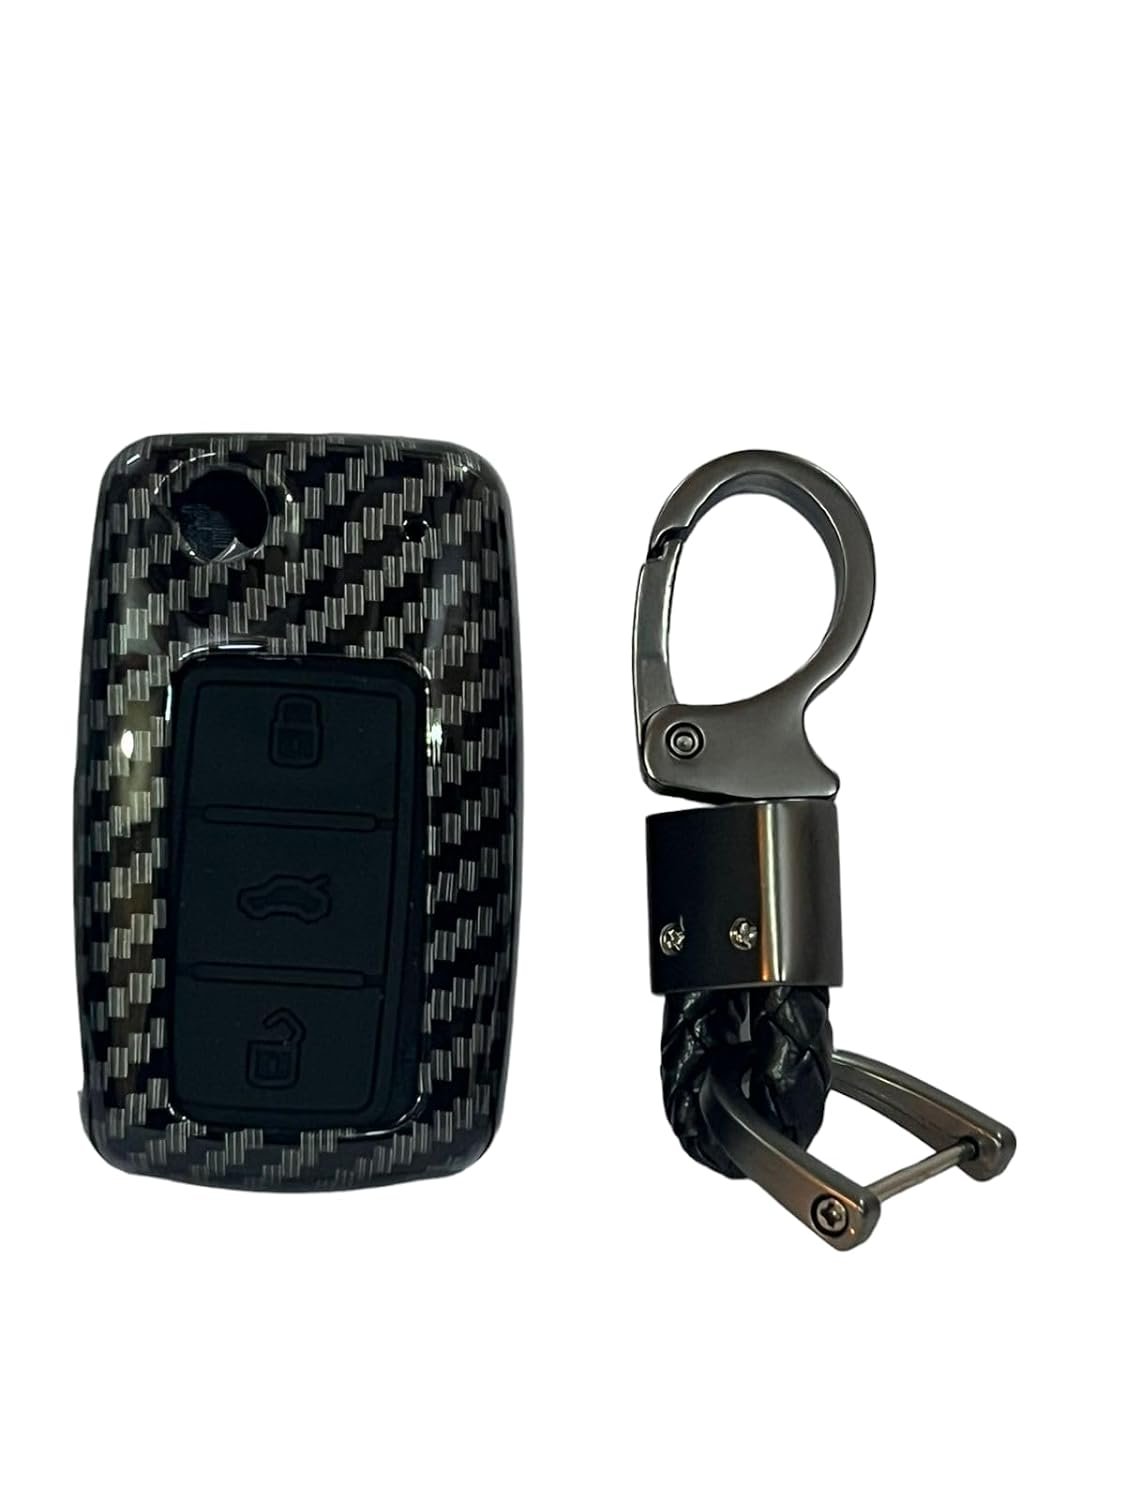 Carbon Fiber ABS Car Key Cover Compatible with Polo,Vento,Ameo 3Button Flip Key (Key Chain Included) Image 